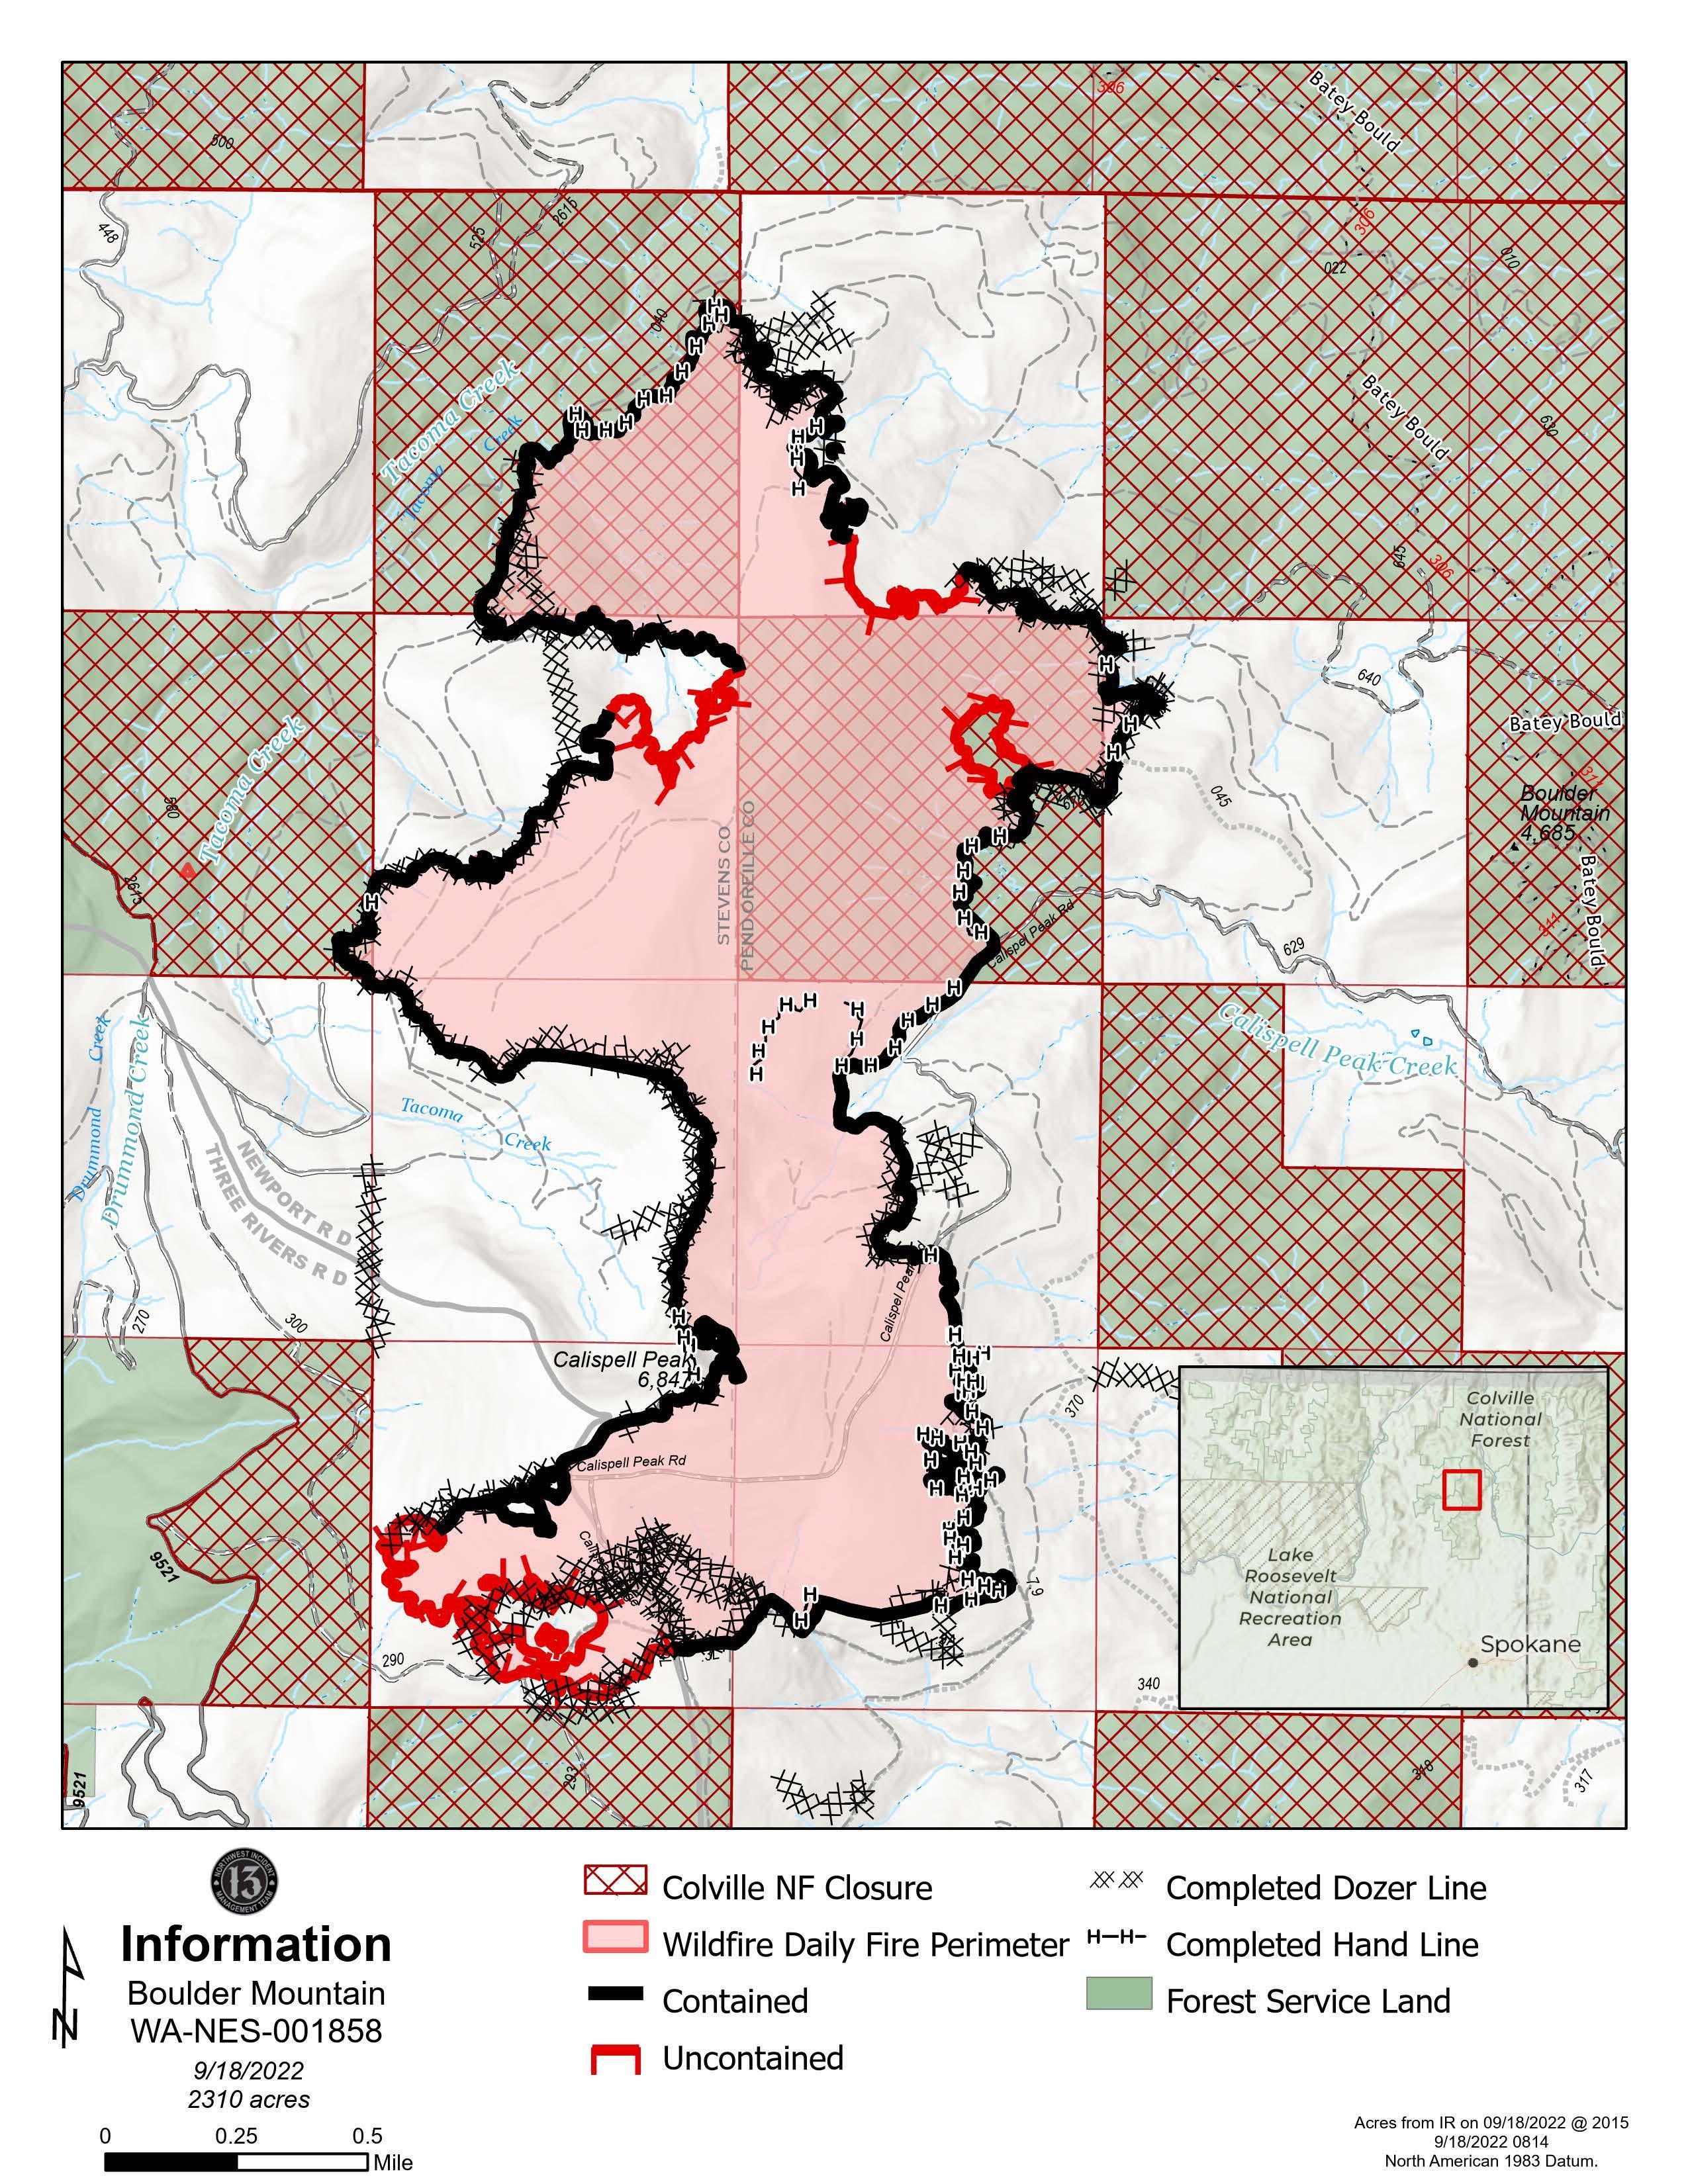 Boulder Mountain Fire map for Sunday, Sept. 18